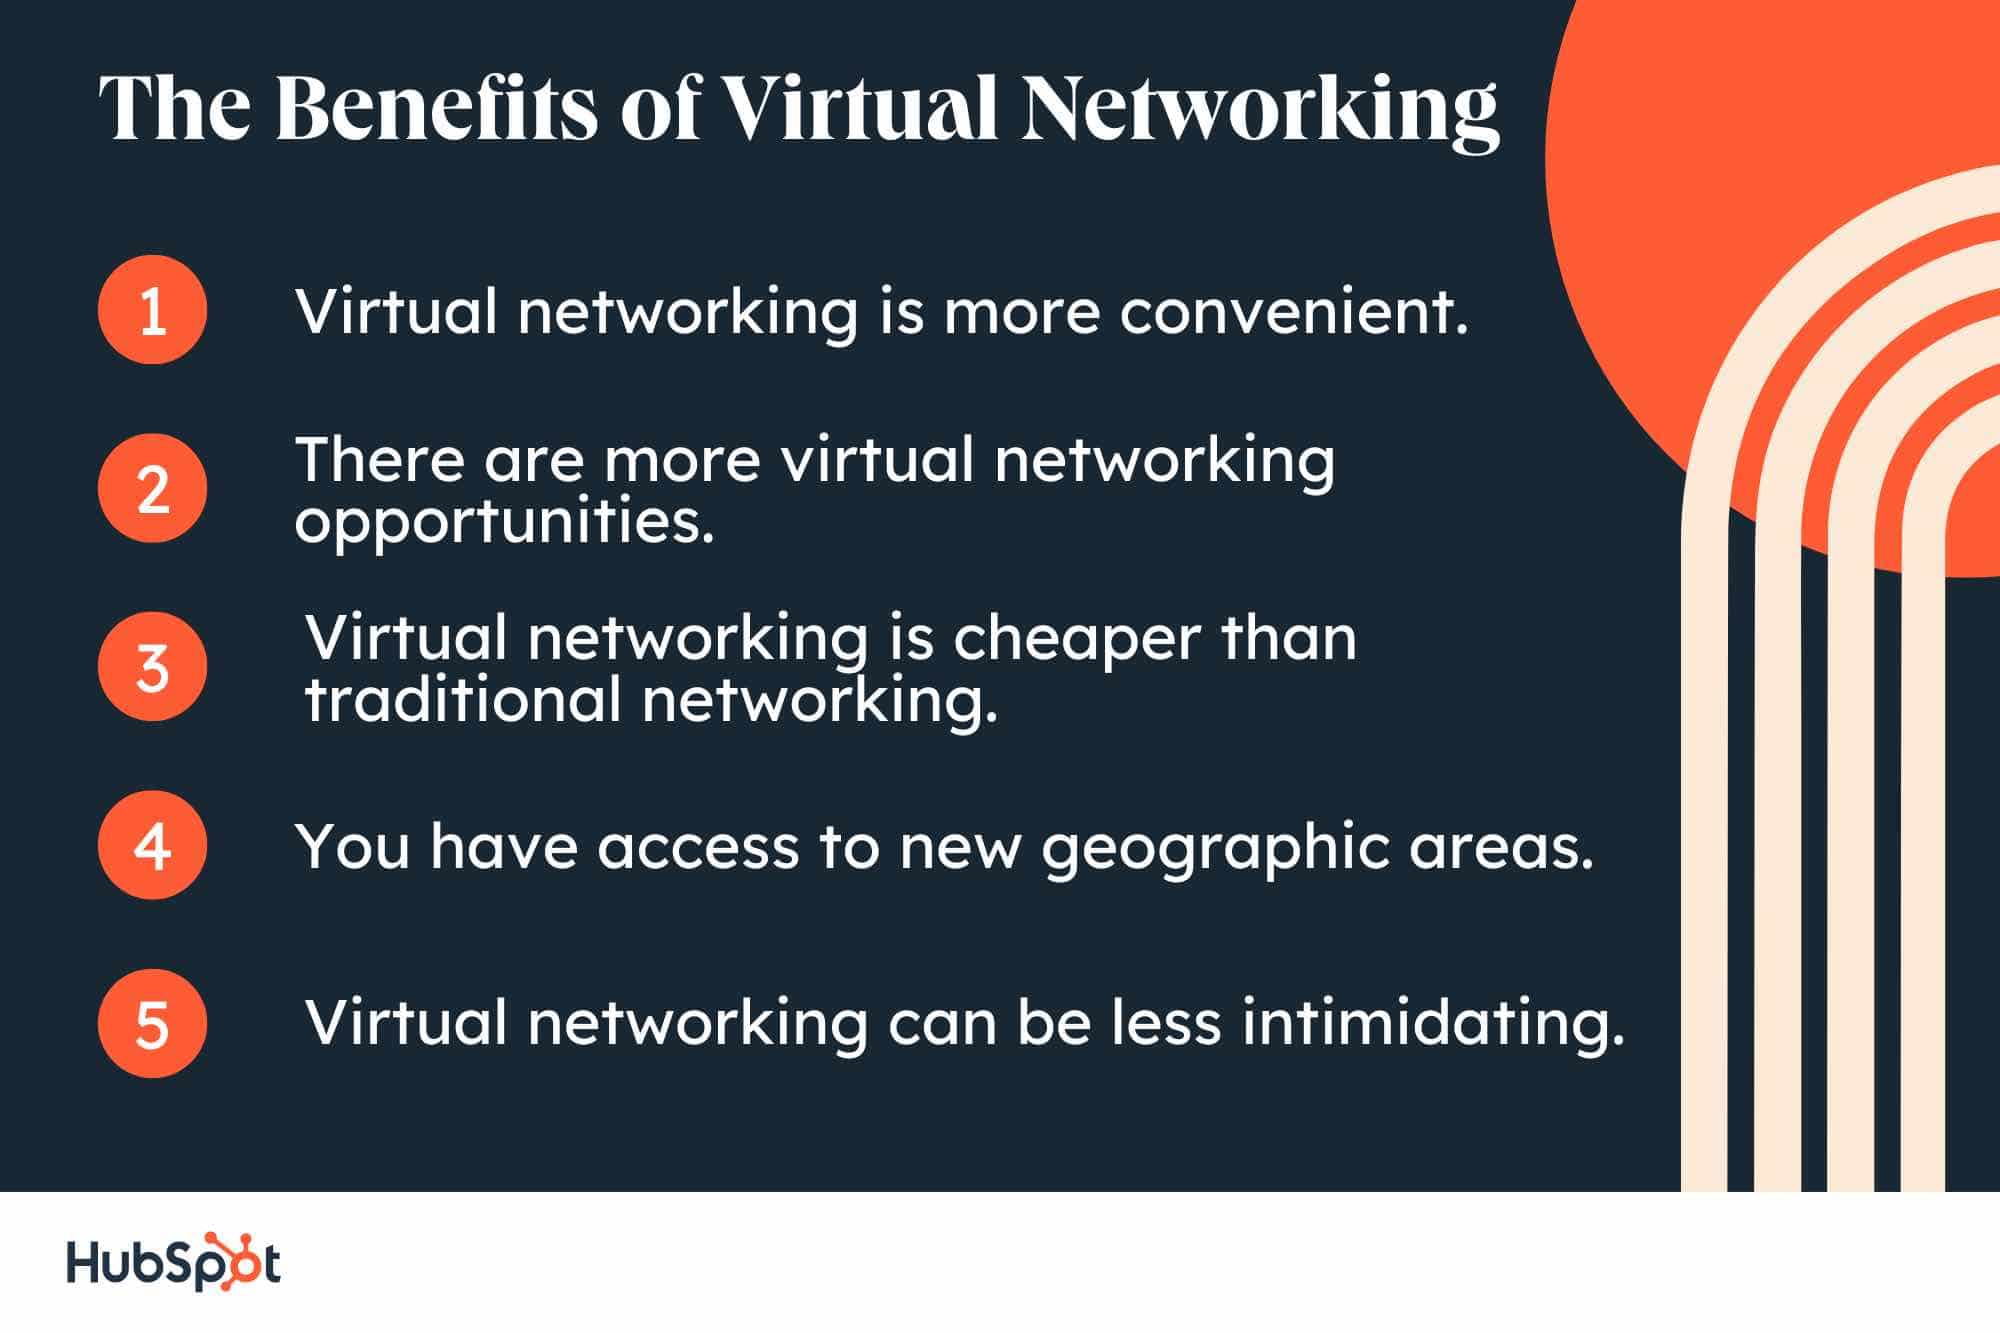 The Benefits of Virtual Networking. Virtual networking is more convenient. There are more virtual networking opportunities. Virtual networking is cheaper than traditional networking. You have access to new geographic areas. Virtual networking can be less intimidating.